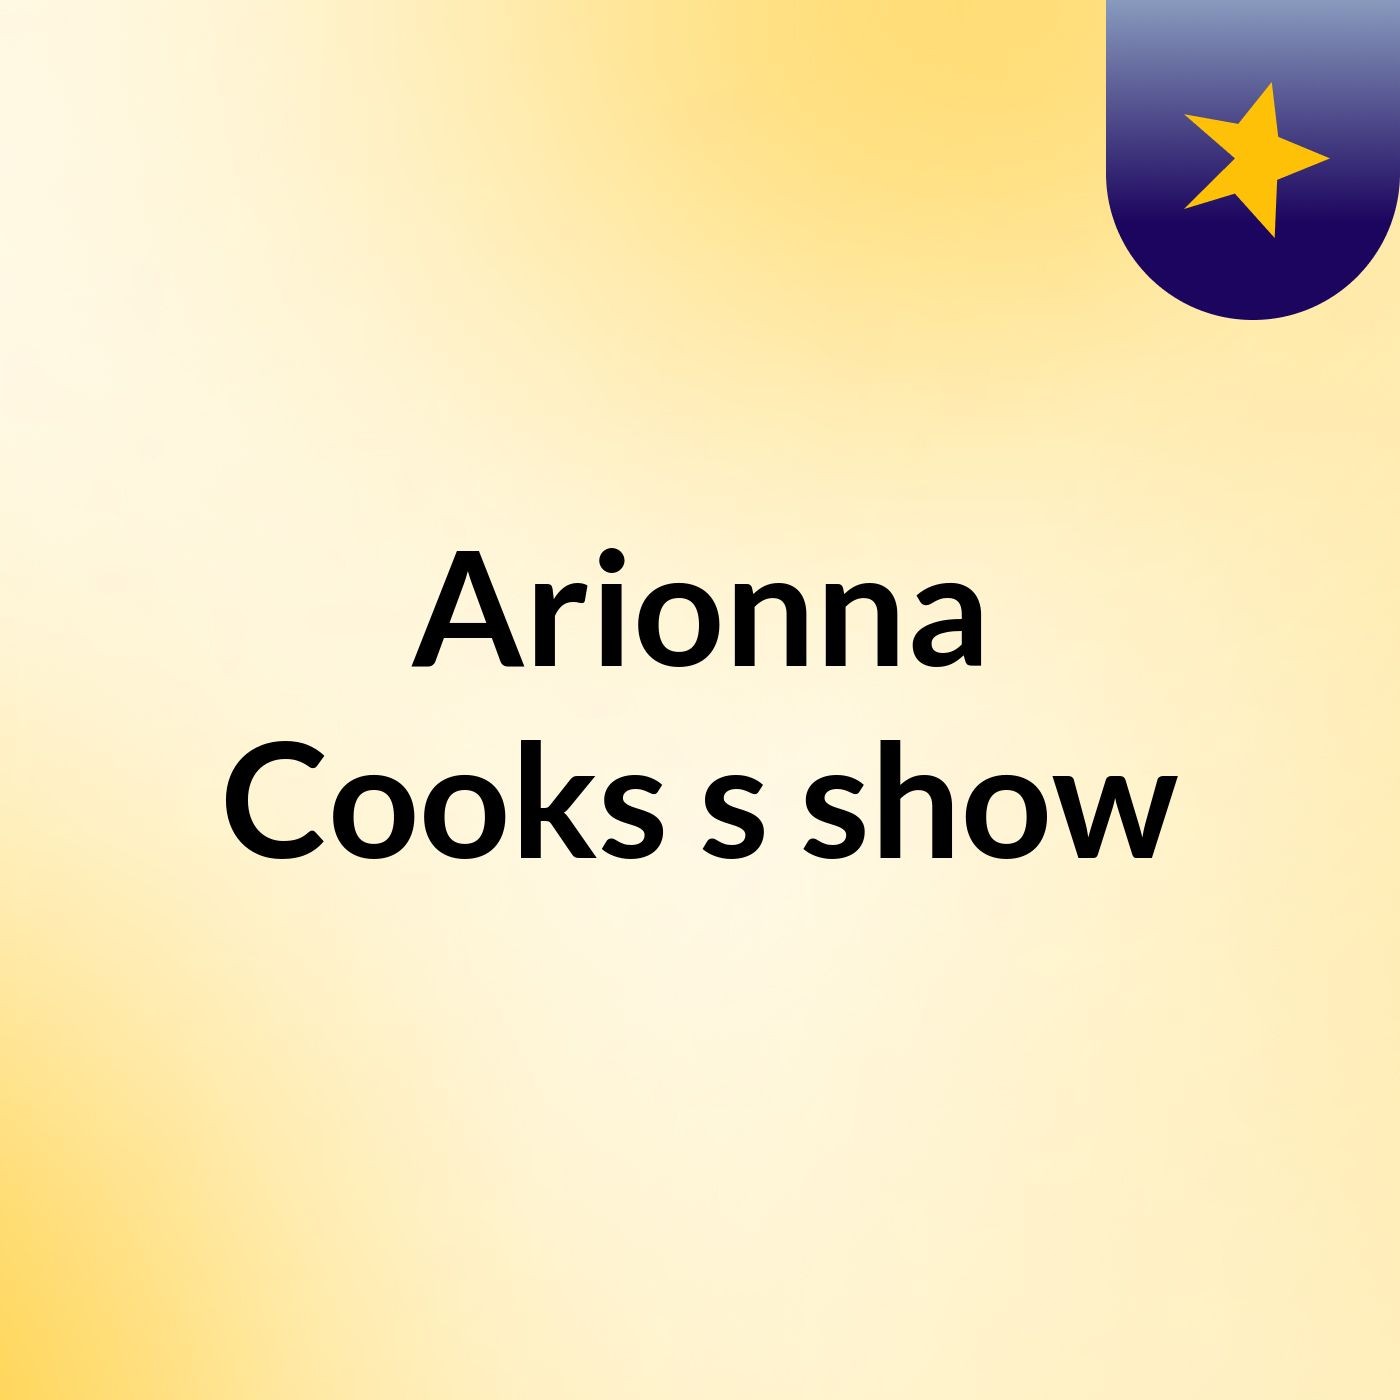 Arionna Cooks's show